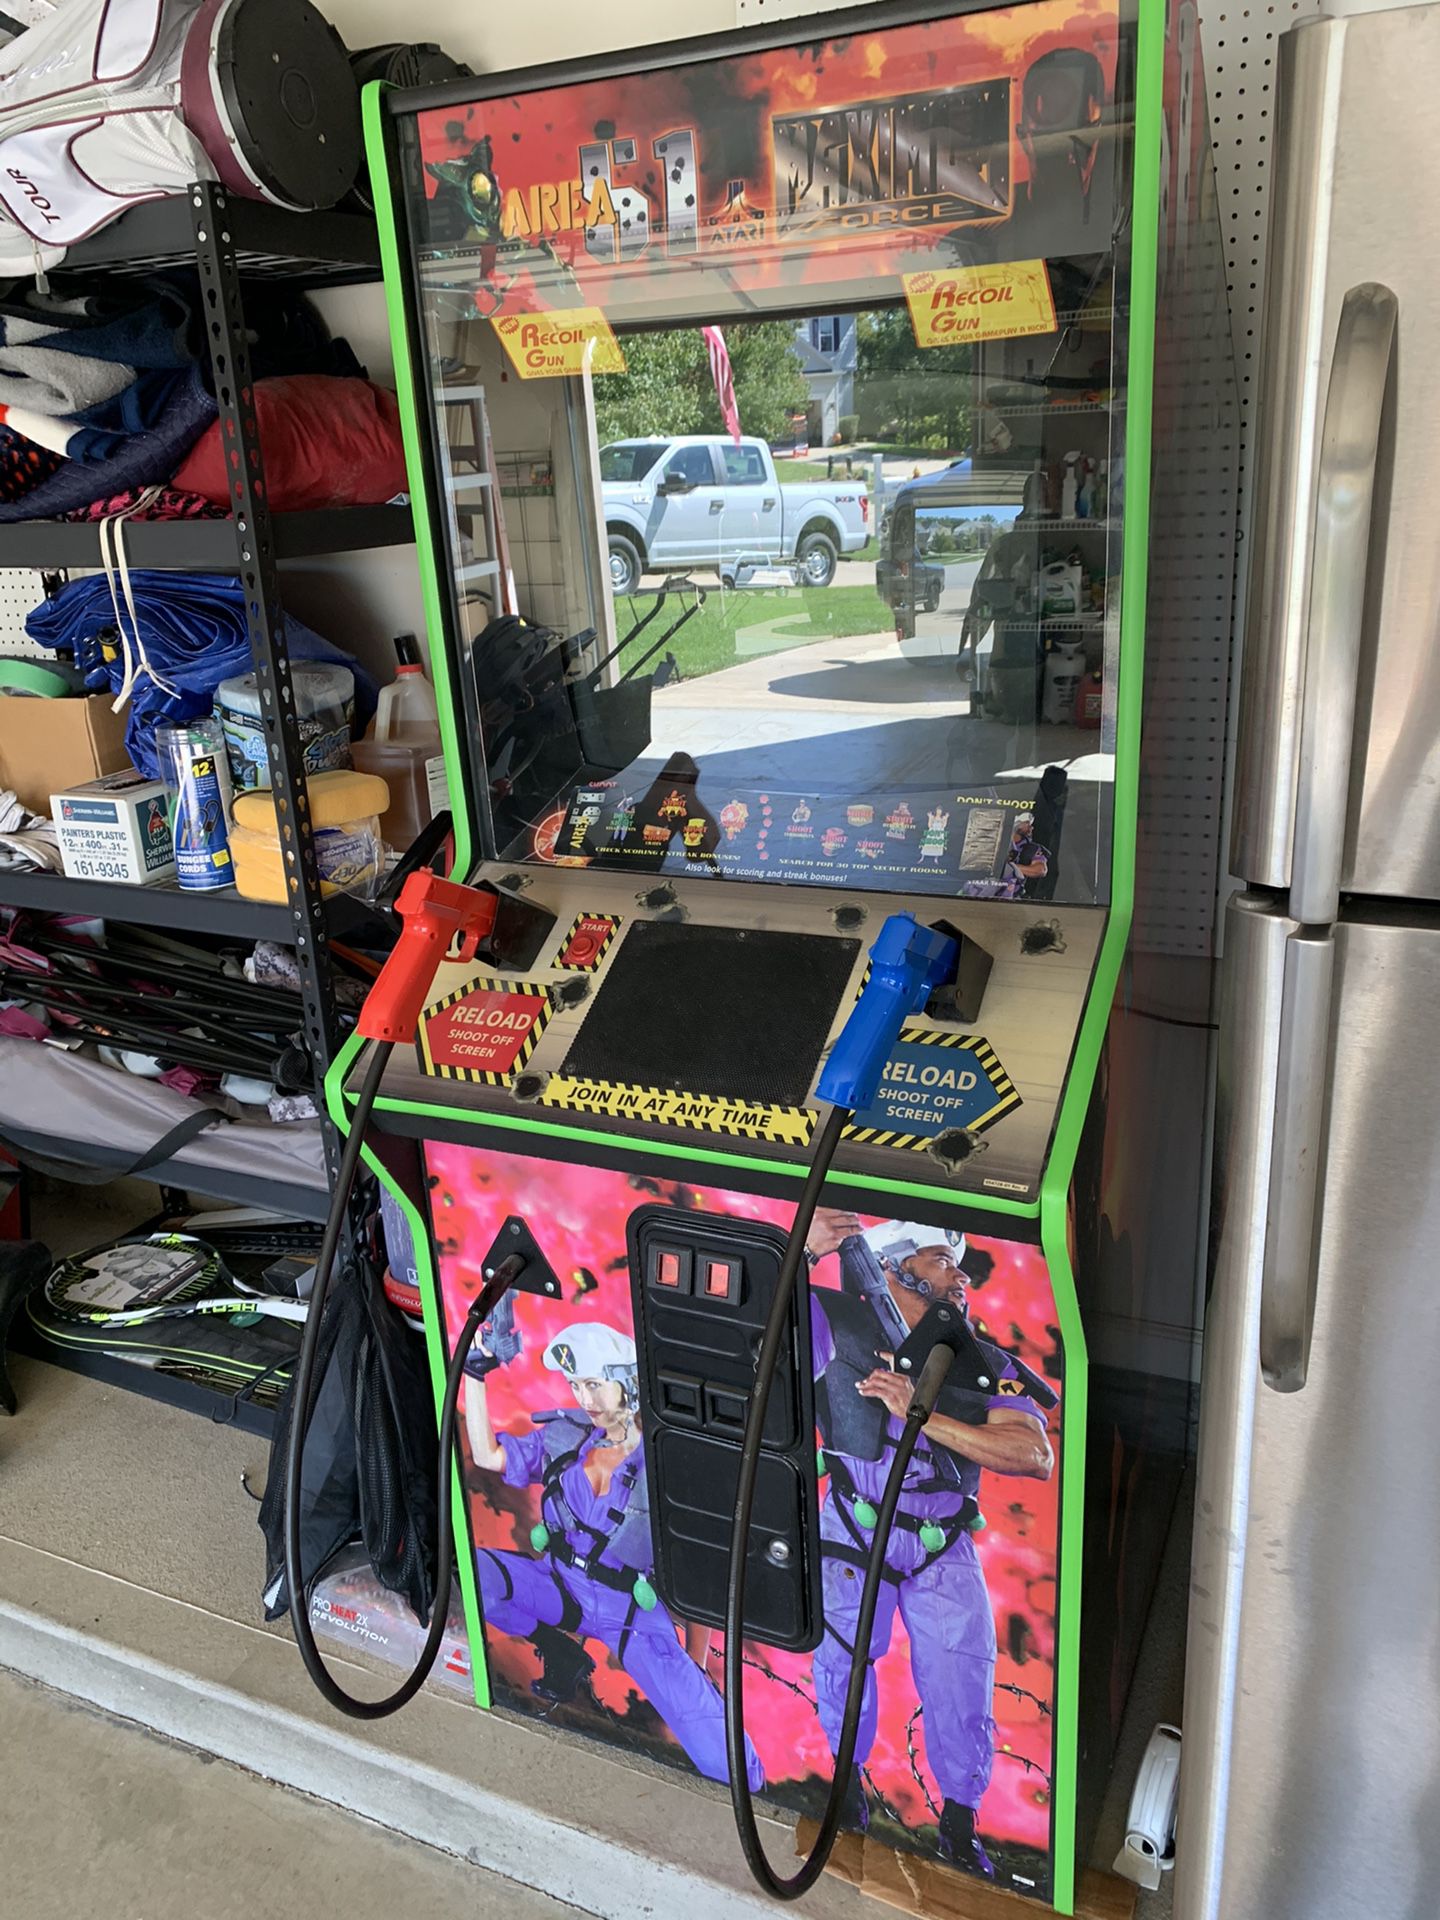 Coin operated arcade game, maximum force and Area 51